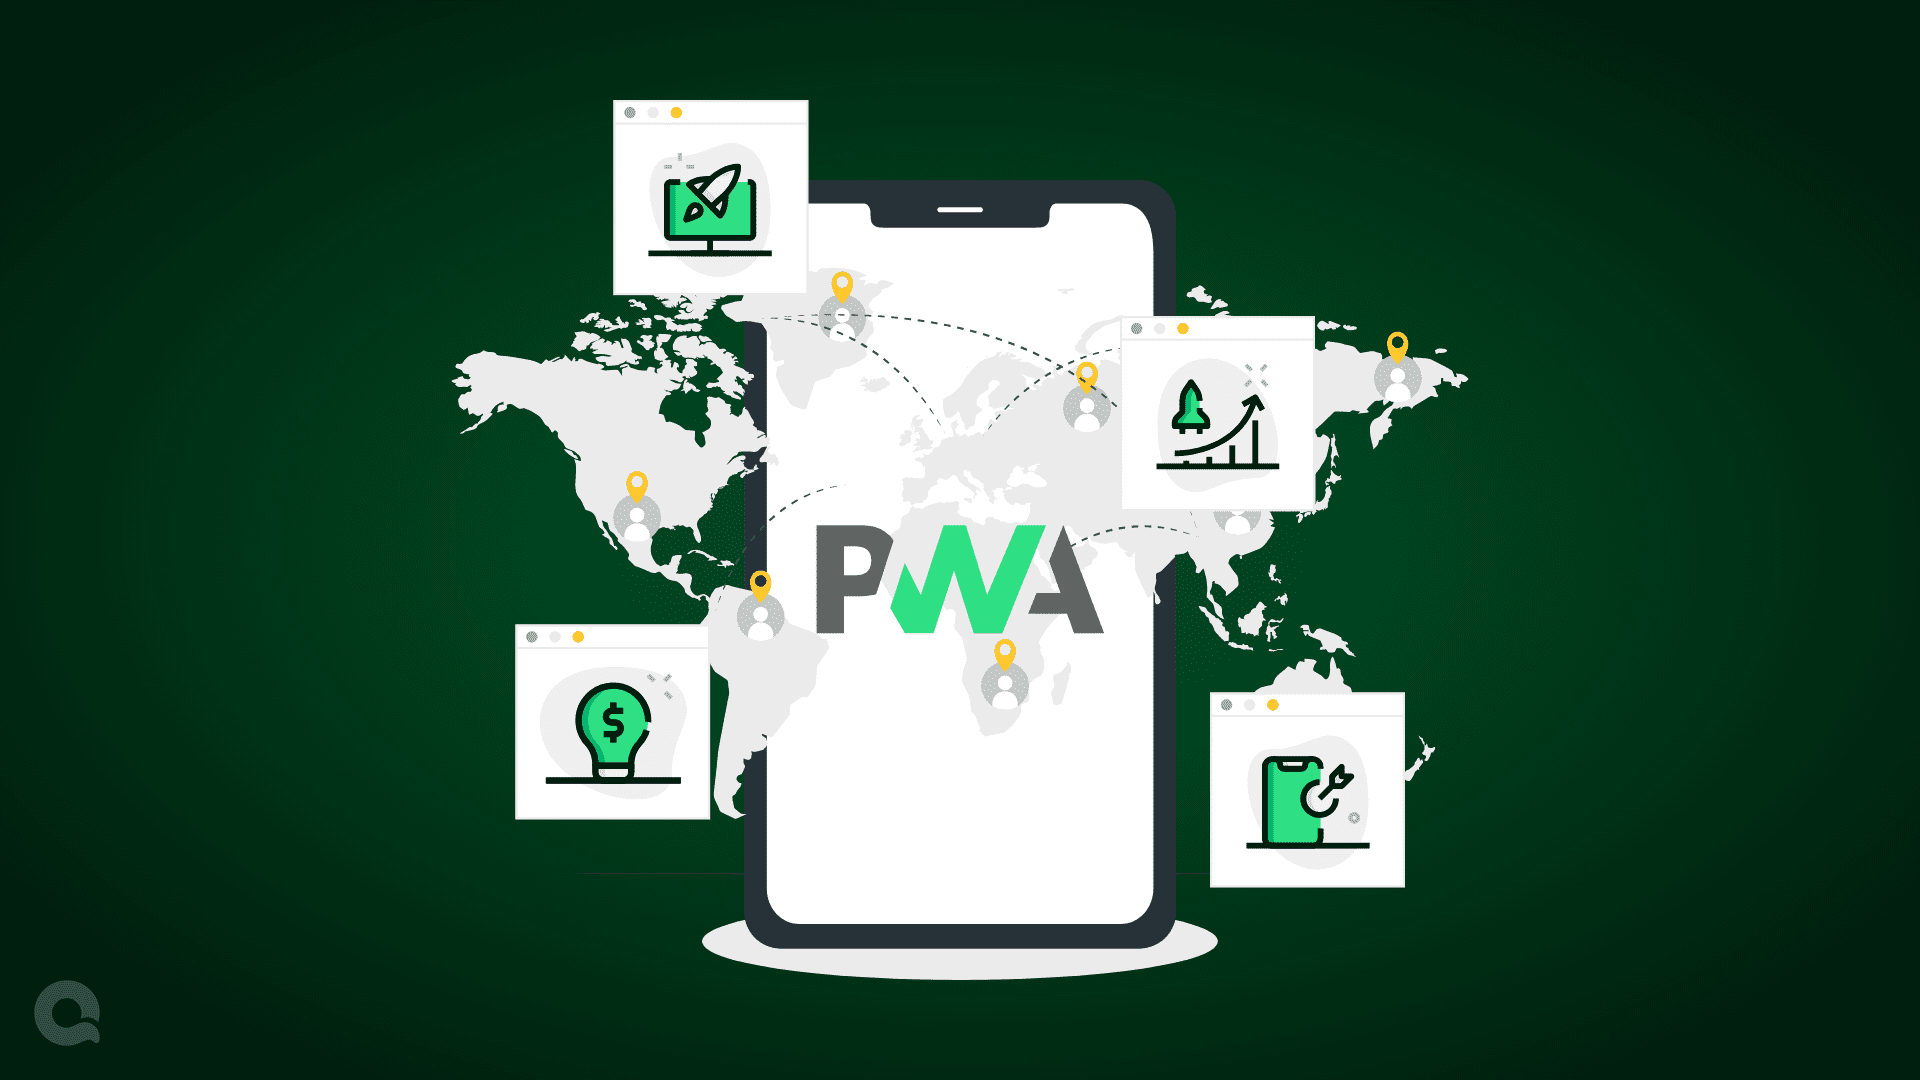 What are the advantages of PWA